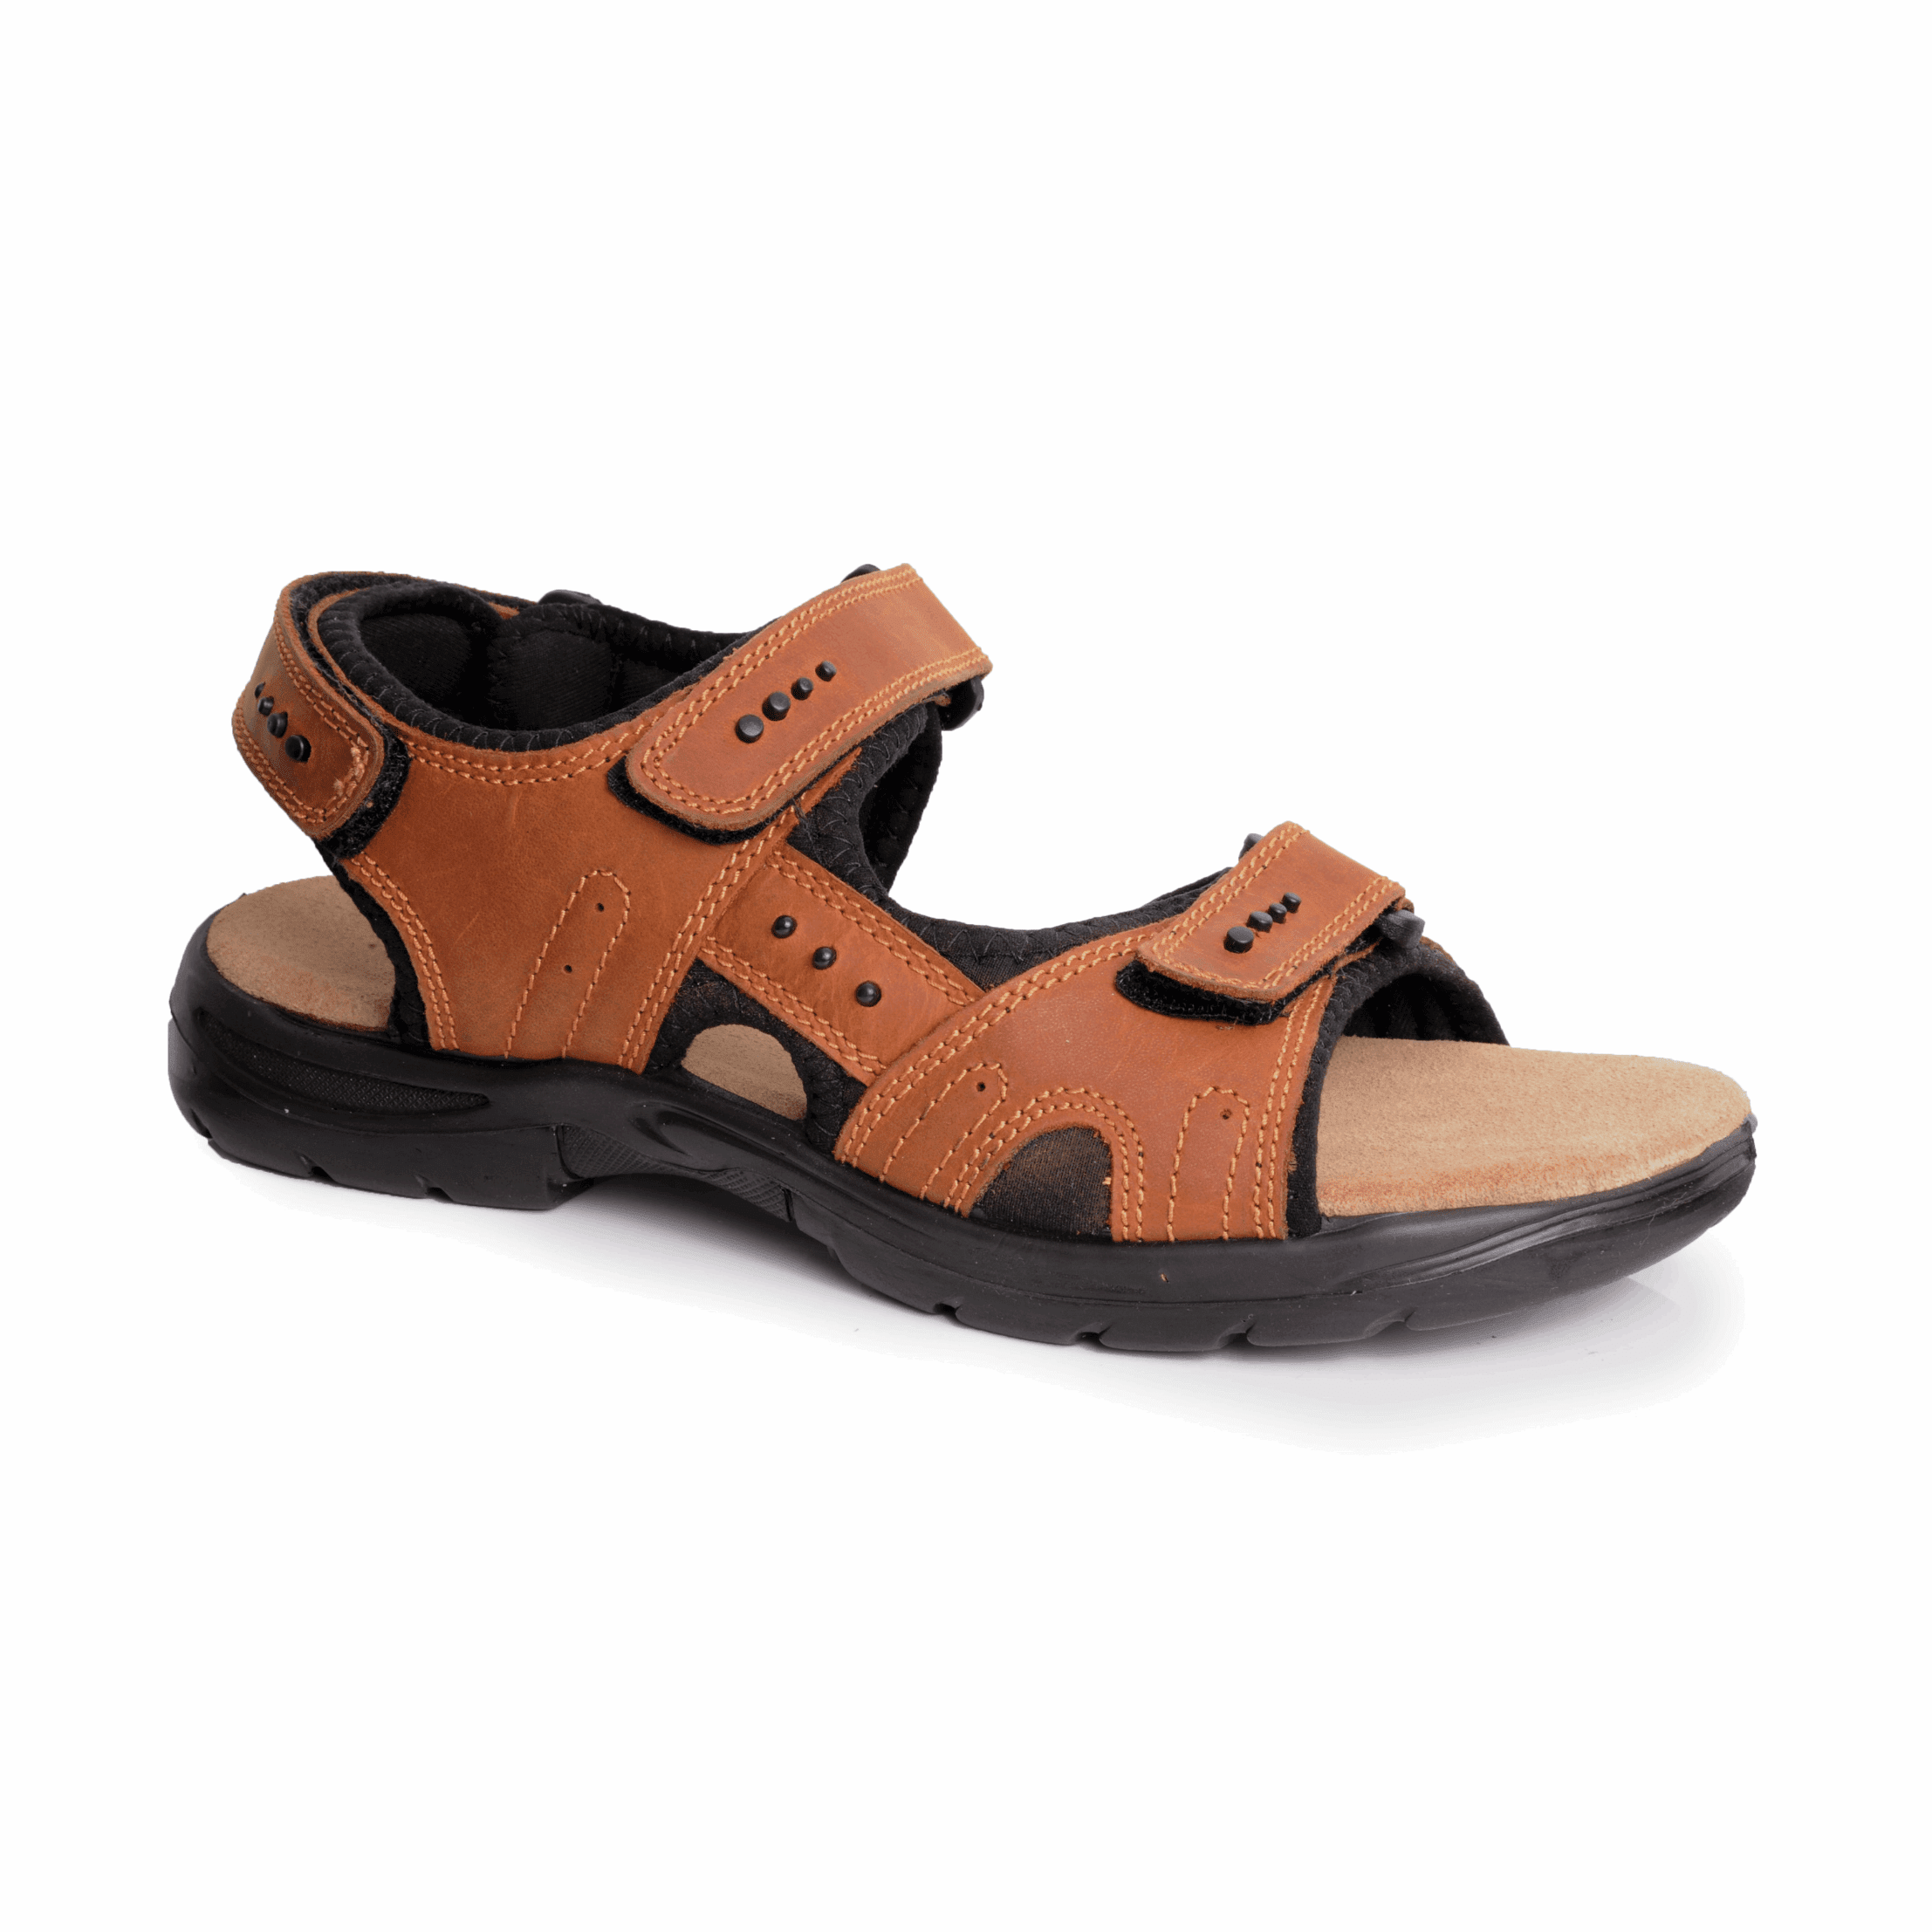 Balmoral Leather Open Toe Sandals